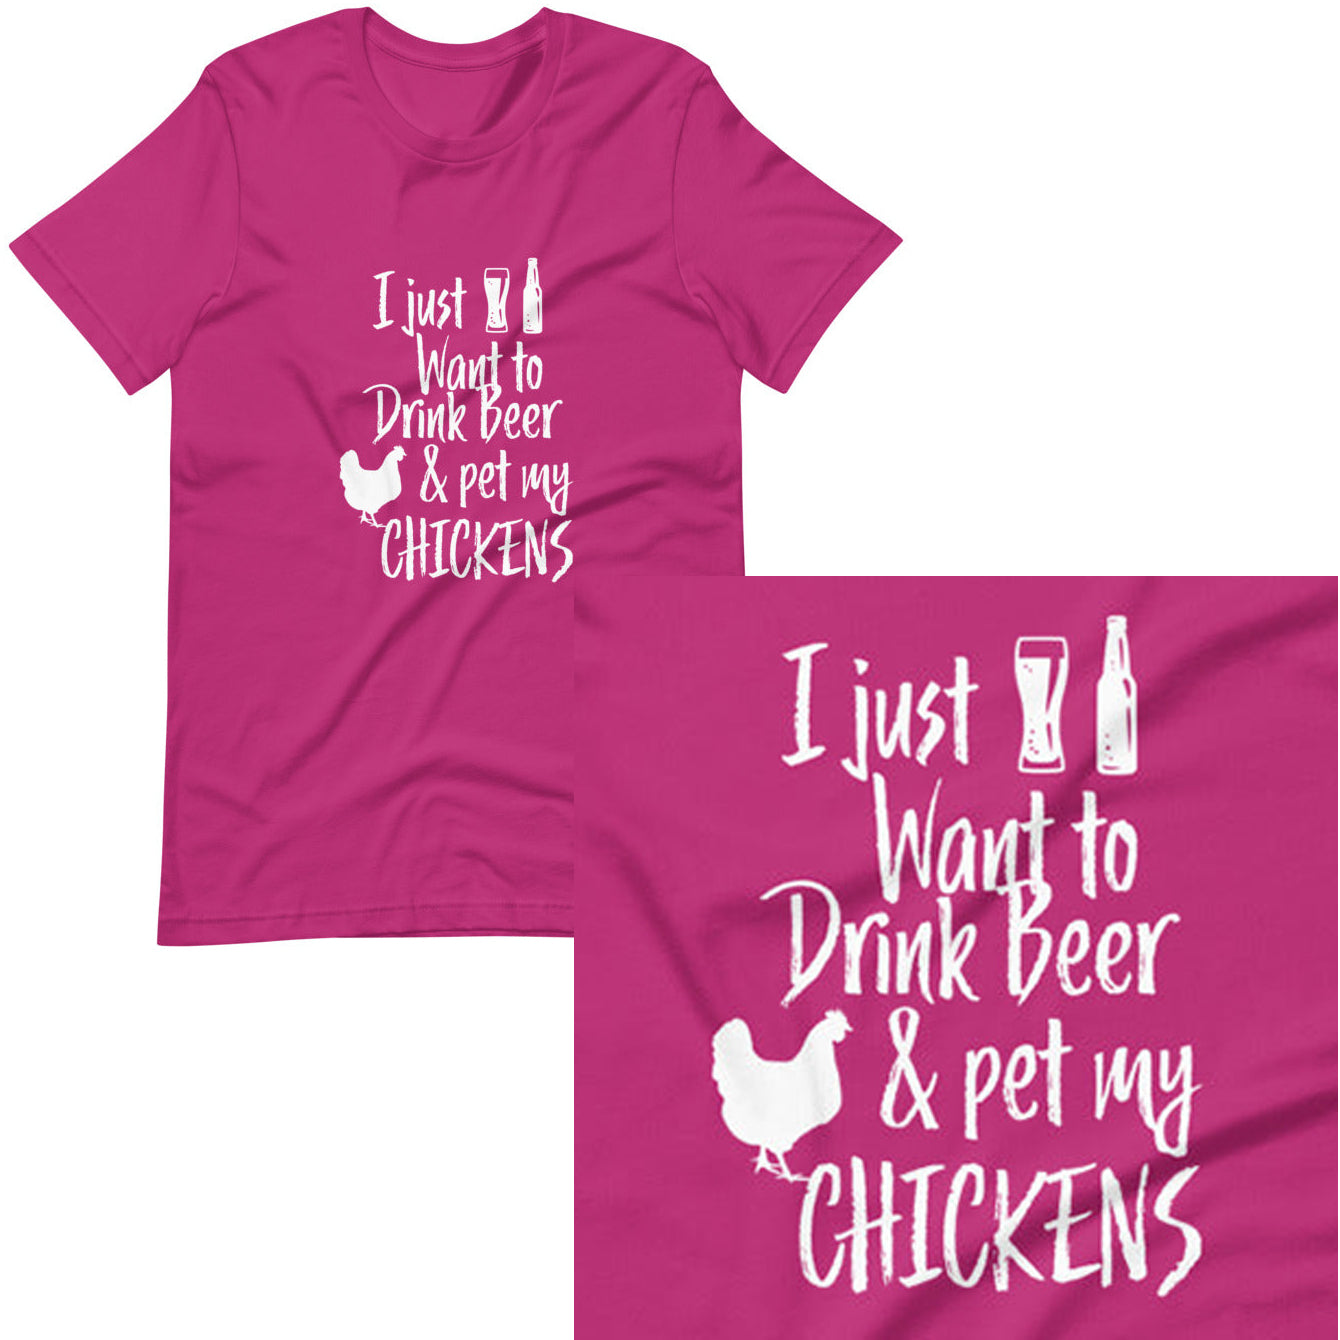 I just want to drink beer and pet my CHICKENS T-shirt